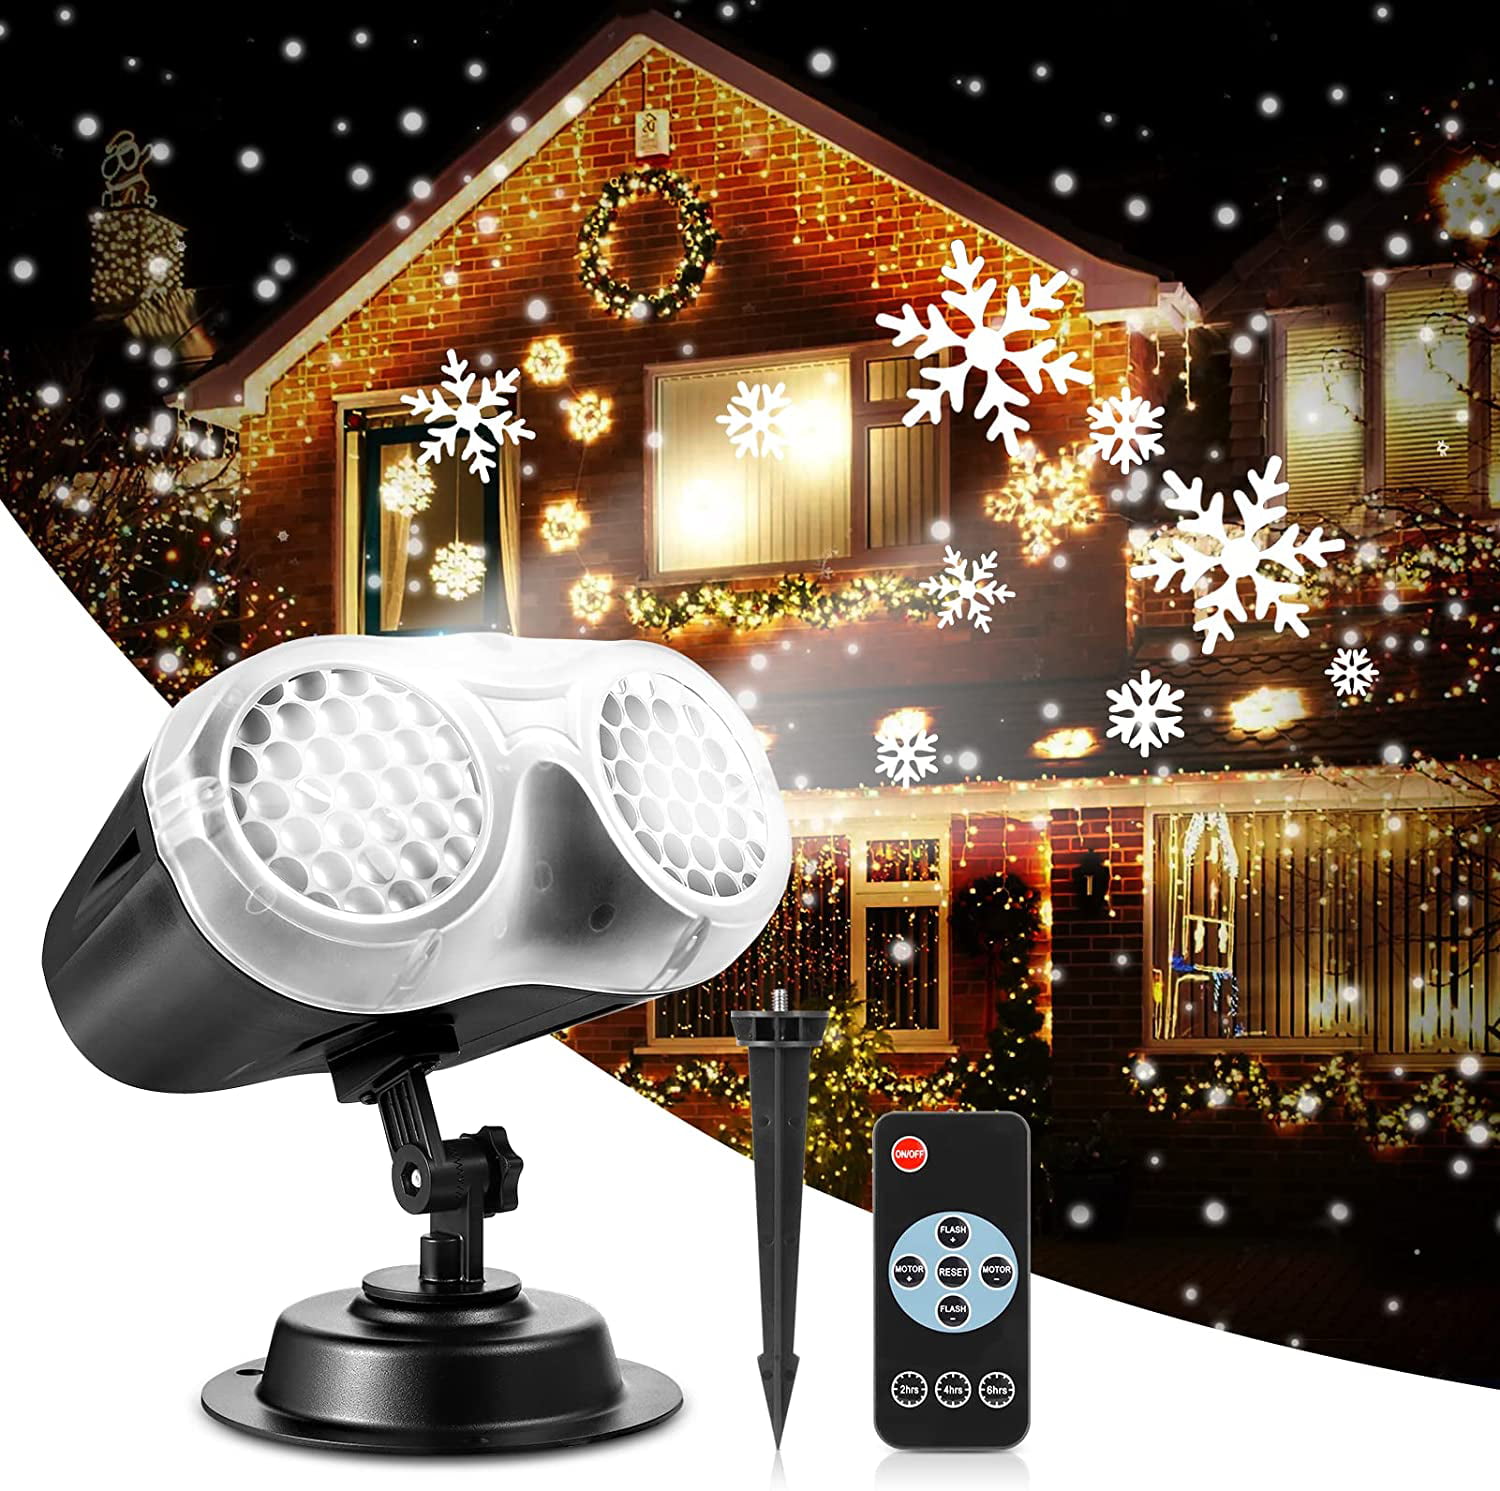 Snowflakes Projector Christmas LED Light Snow Projection Lamp for New Year Party 